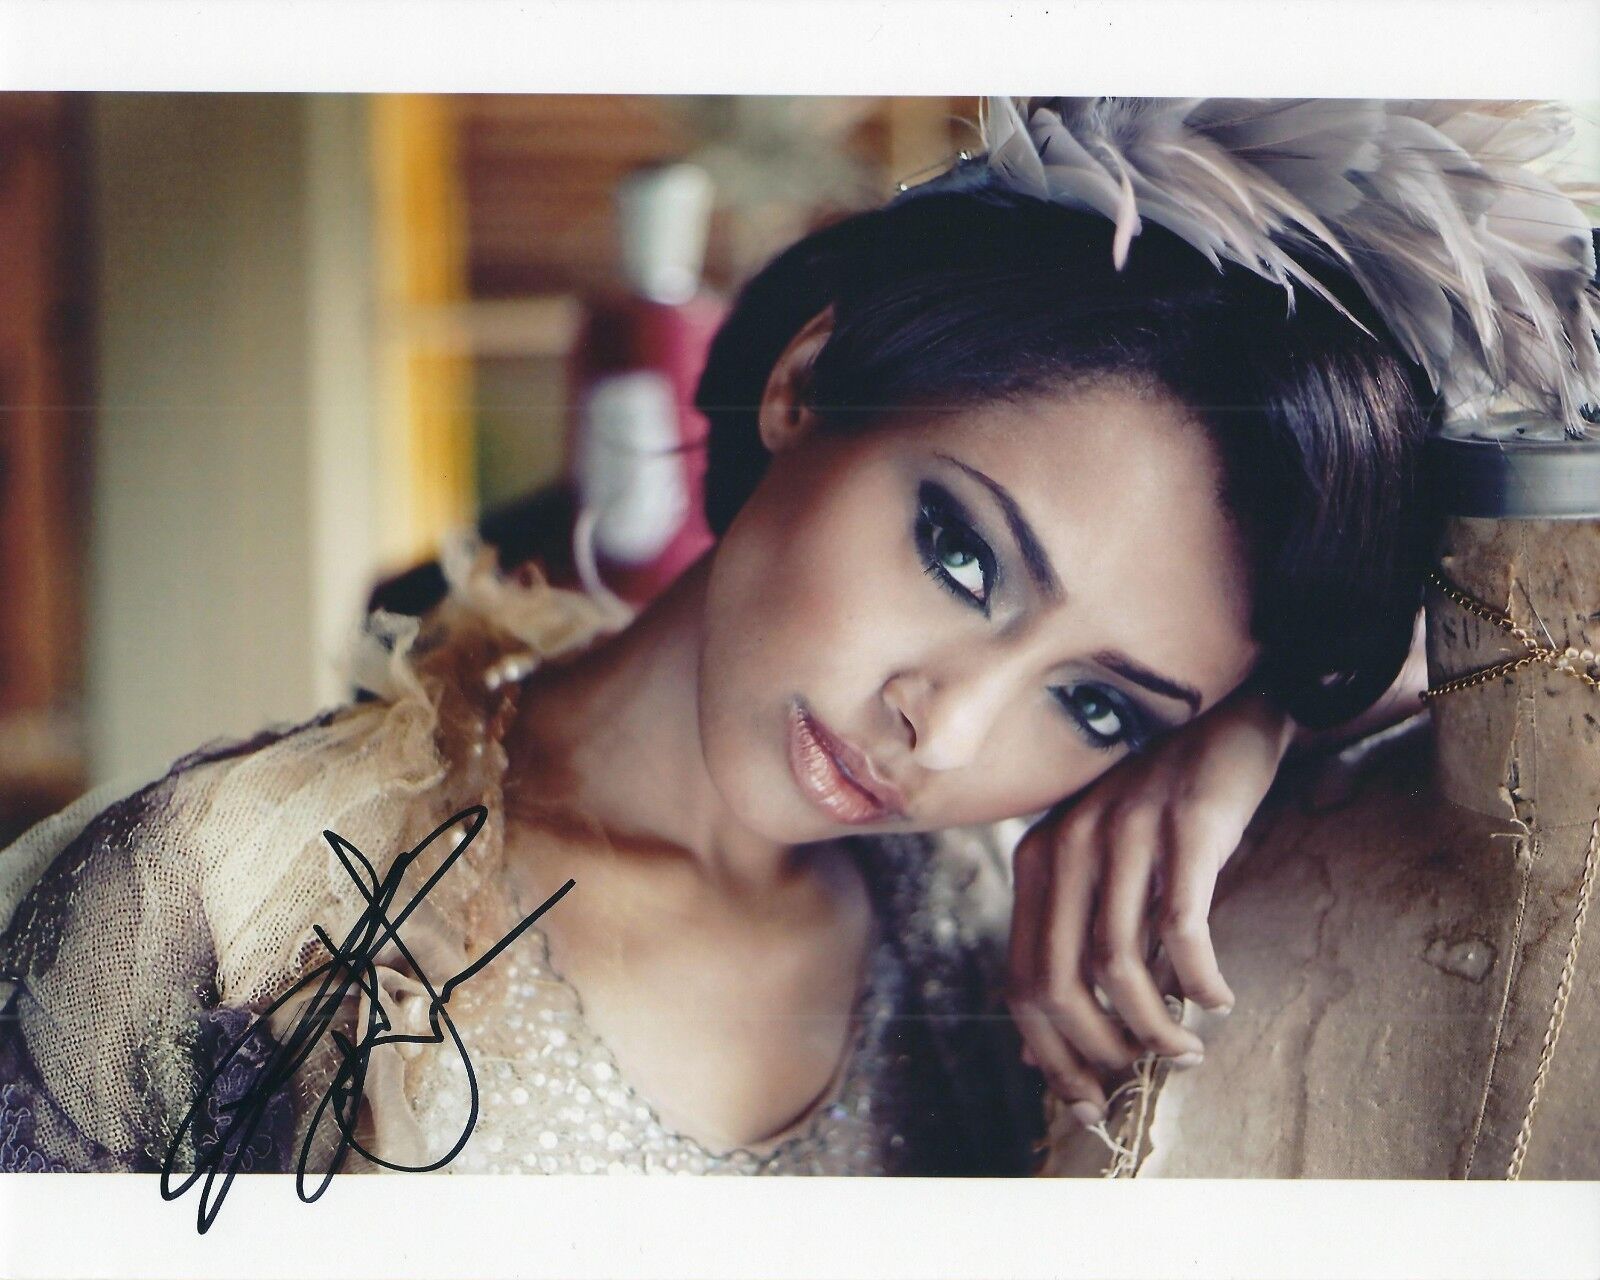 KATERINA GRAHAM GLAMOUR SHOT AUTOGRAPHED Photo Poster painting SIGNED 8X10 #6